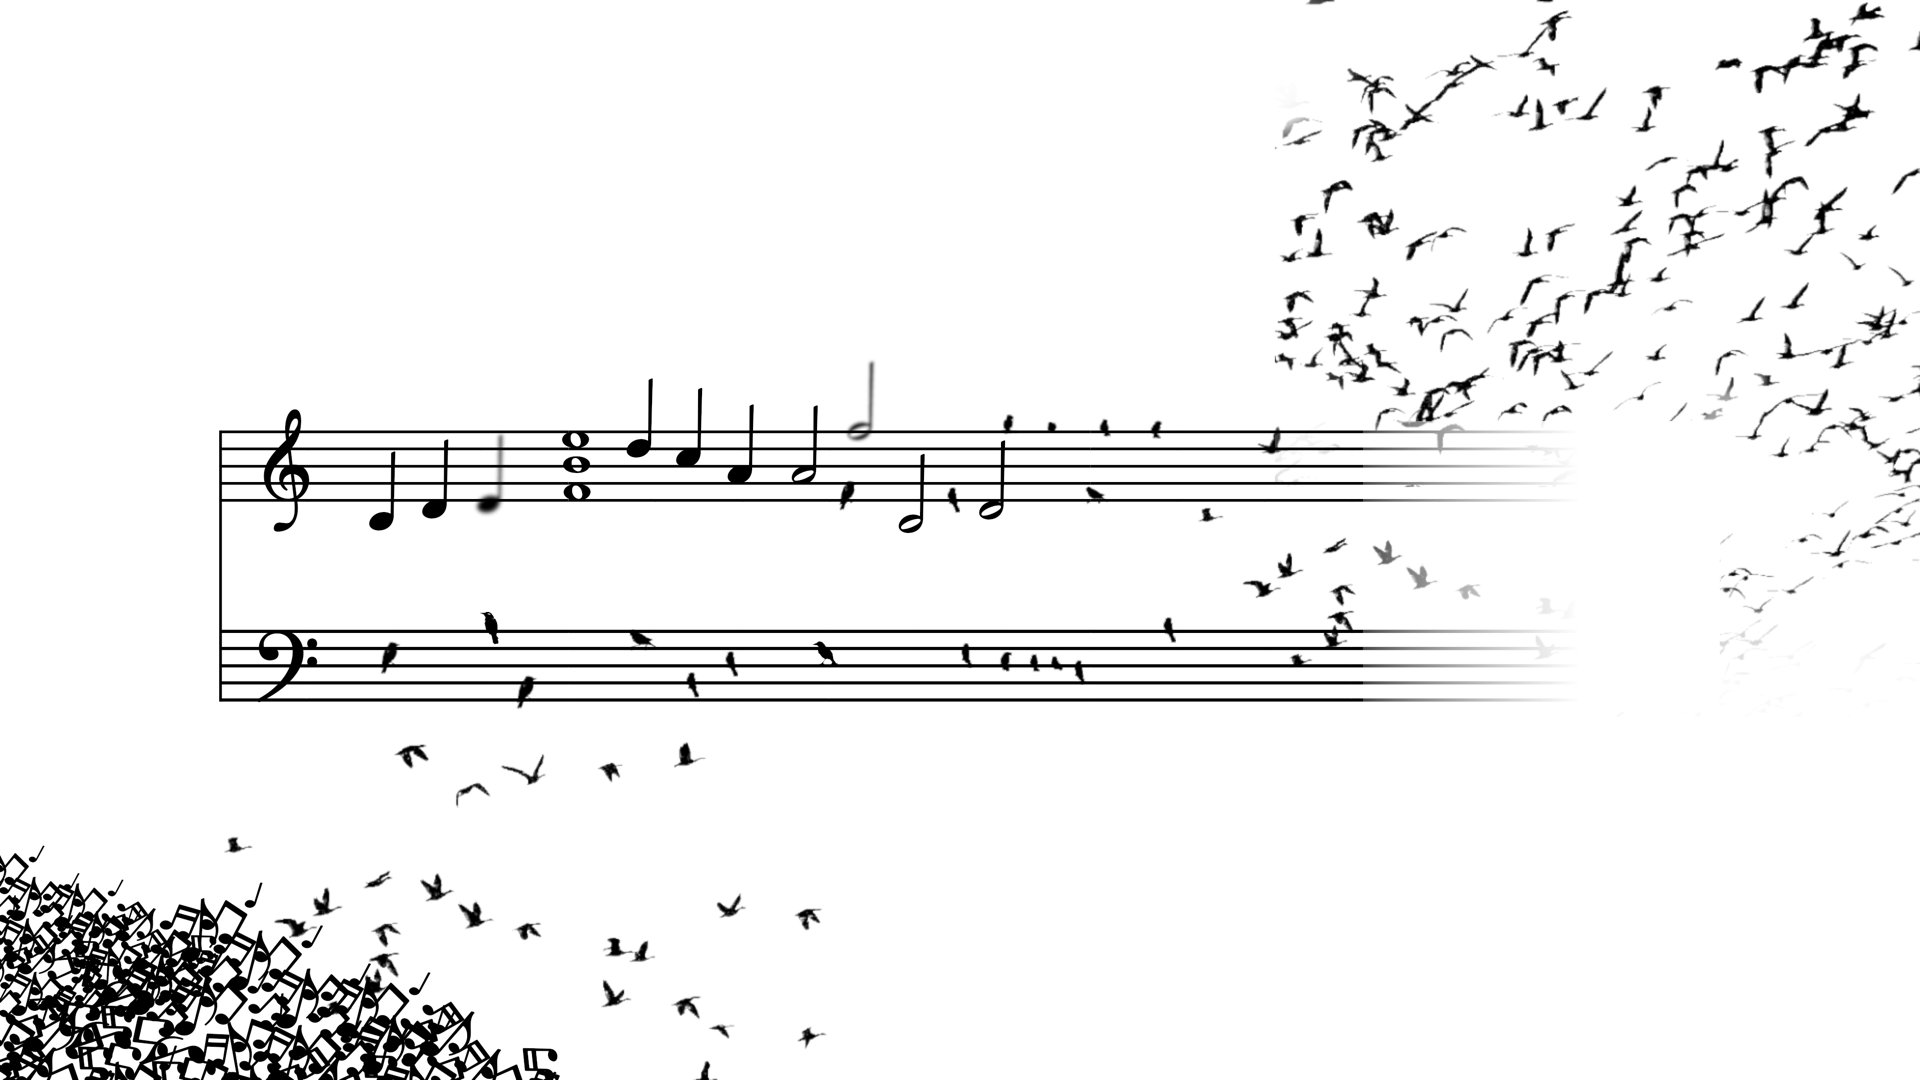 White background. The top layer presents a musical score with some notes and passages over the lines of the musical score. On the left it presents several musical notes together that turn into birds flying on the right.